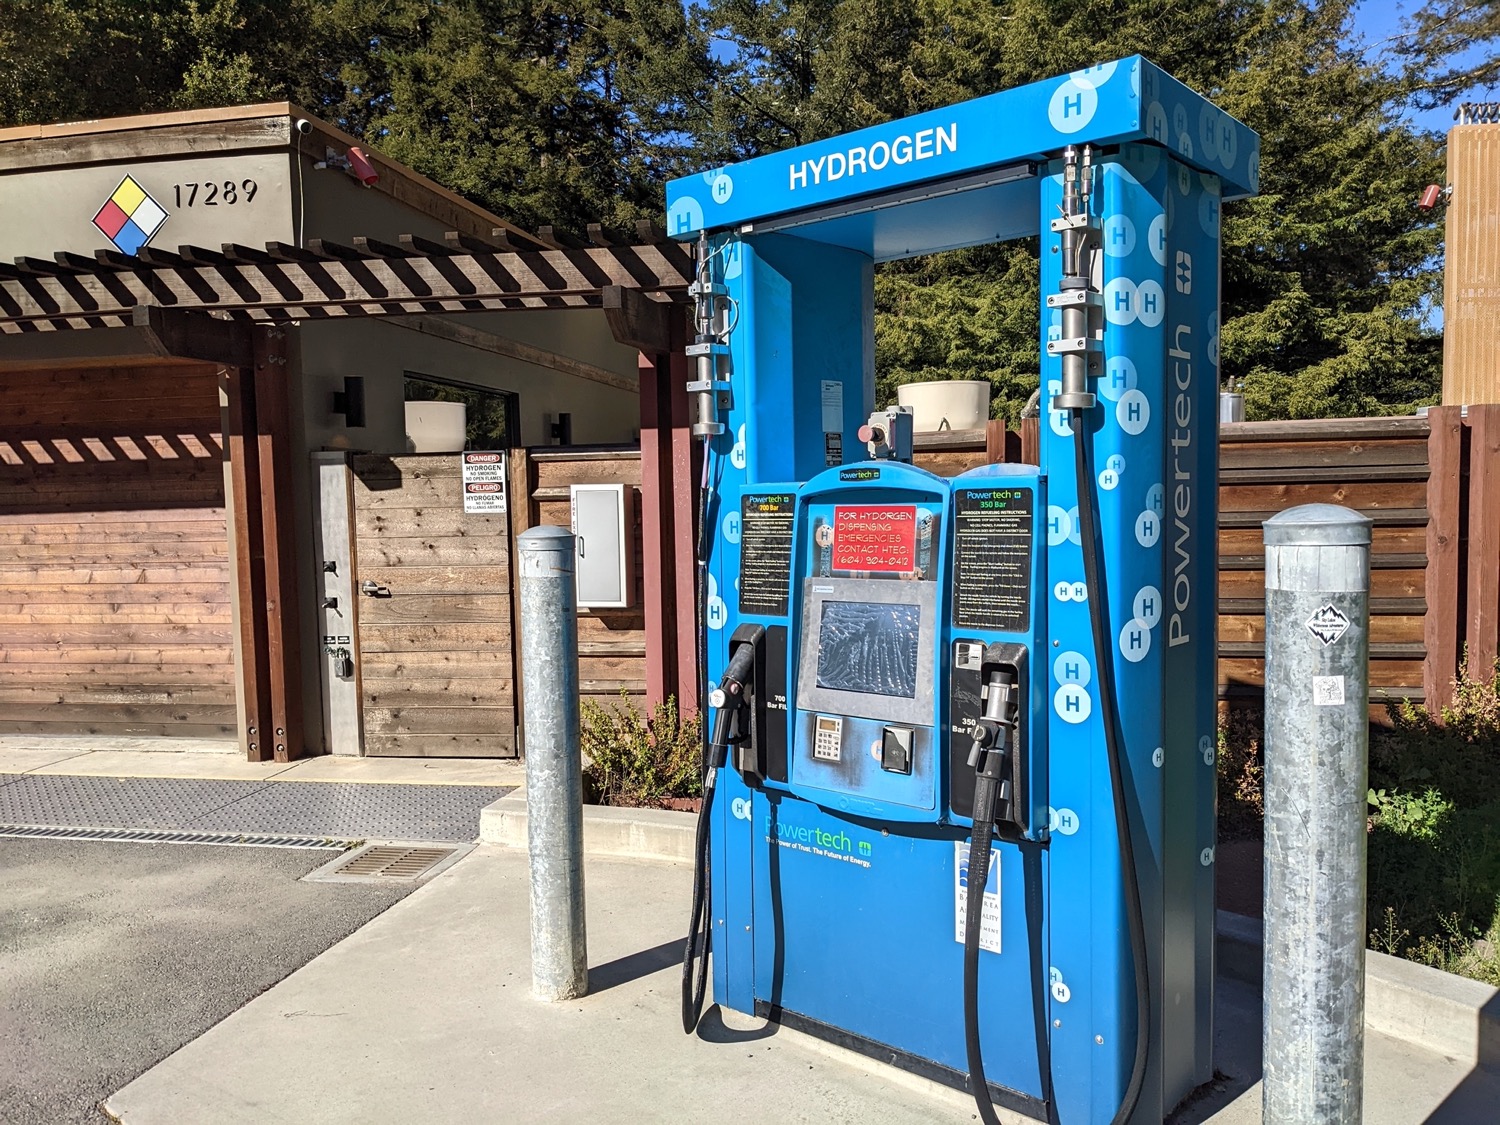 a blue colored gas pump, but it's actually a hydrogen fueling station